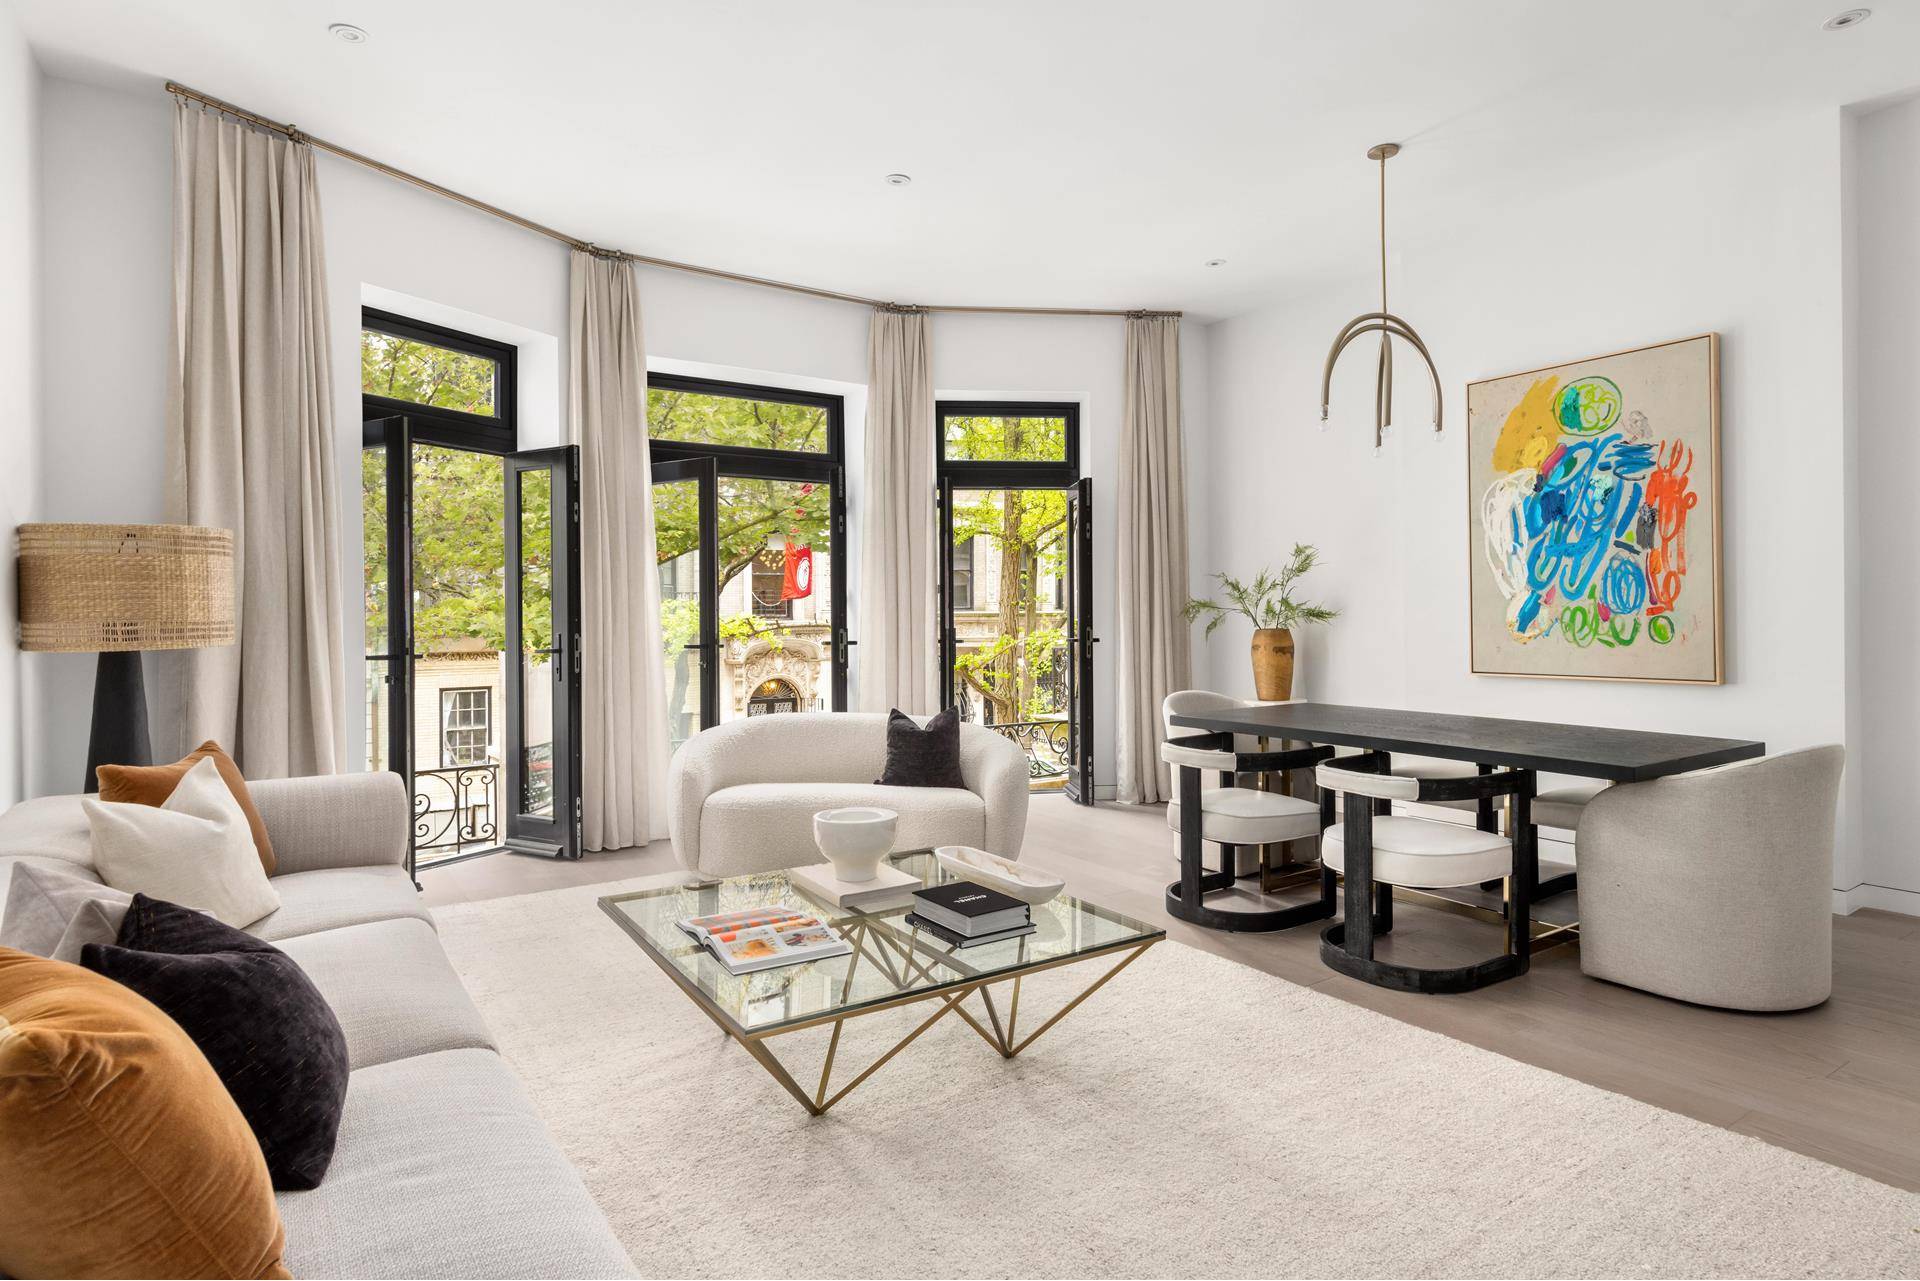 Residence 11 is a meticulously conceived 1 bedroom, 1 bathroom residence comprising over 750 interior square feet, offering an attention to detail rarely found in a historic condominium conversion.